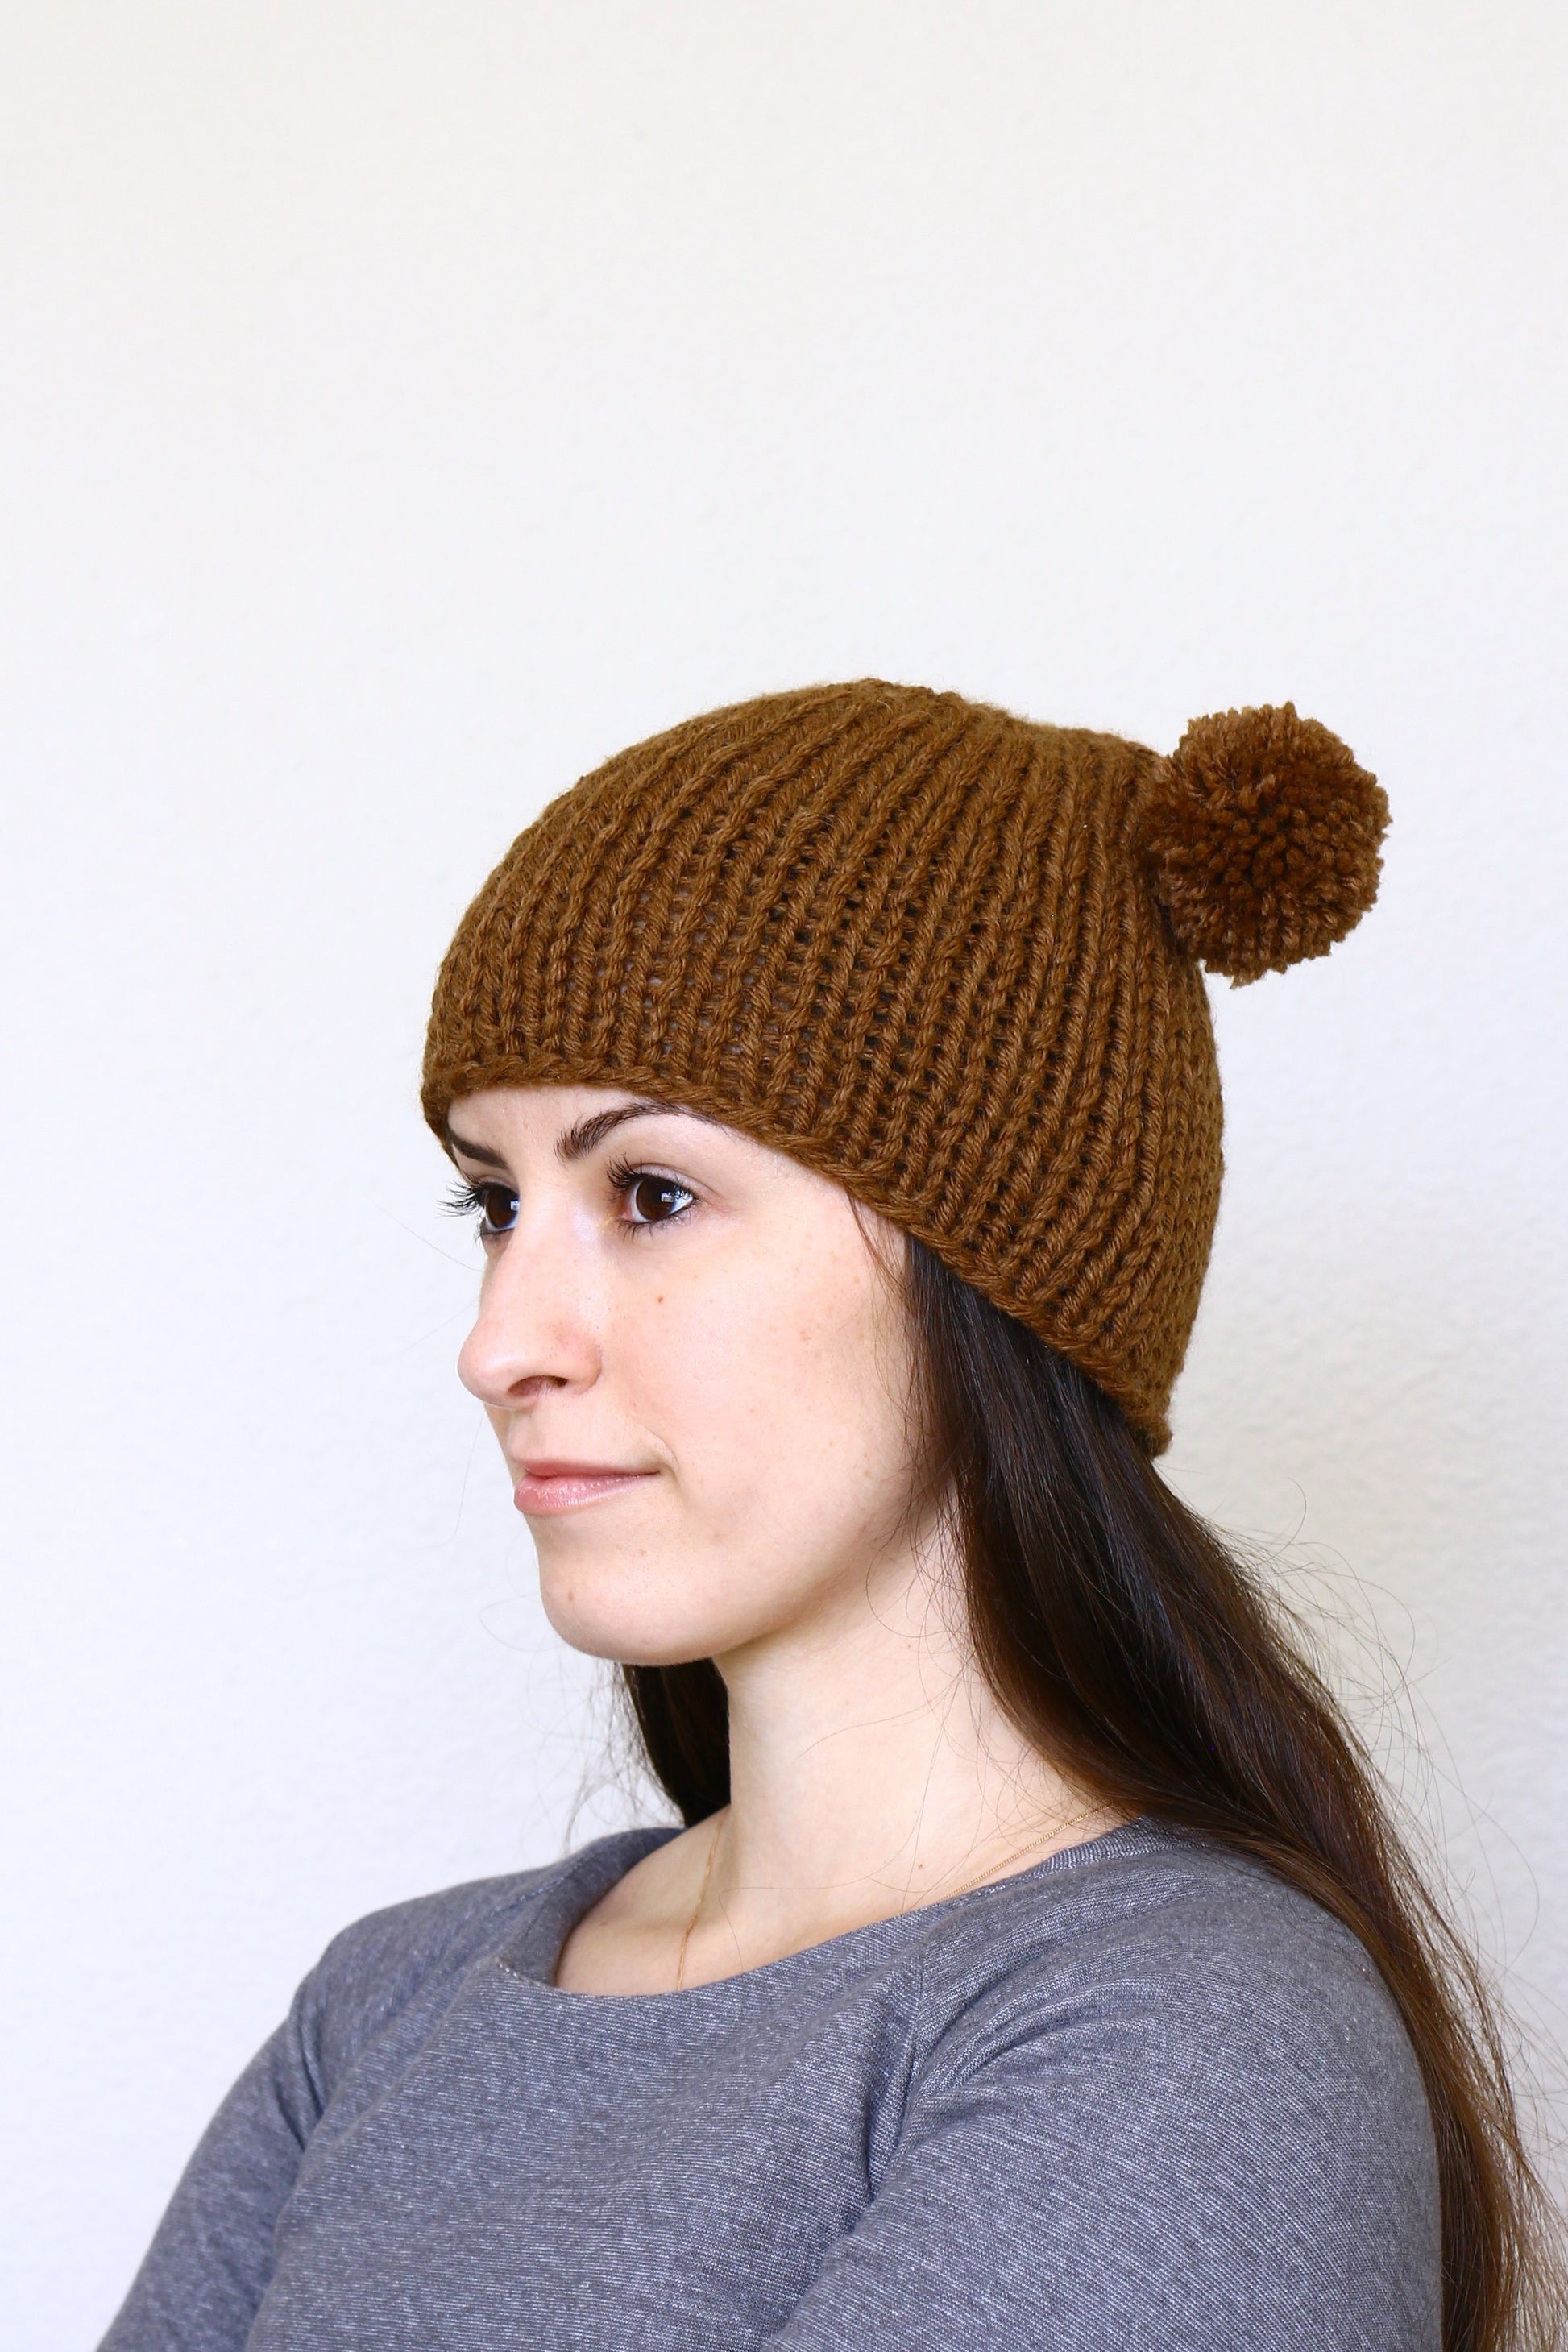 Knit hat with two poms, knit skull hat in chocolate brown color